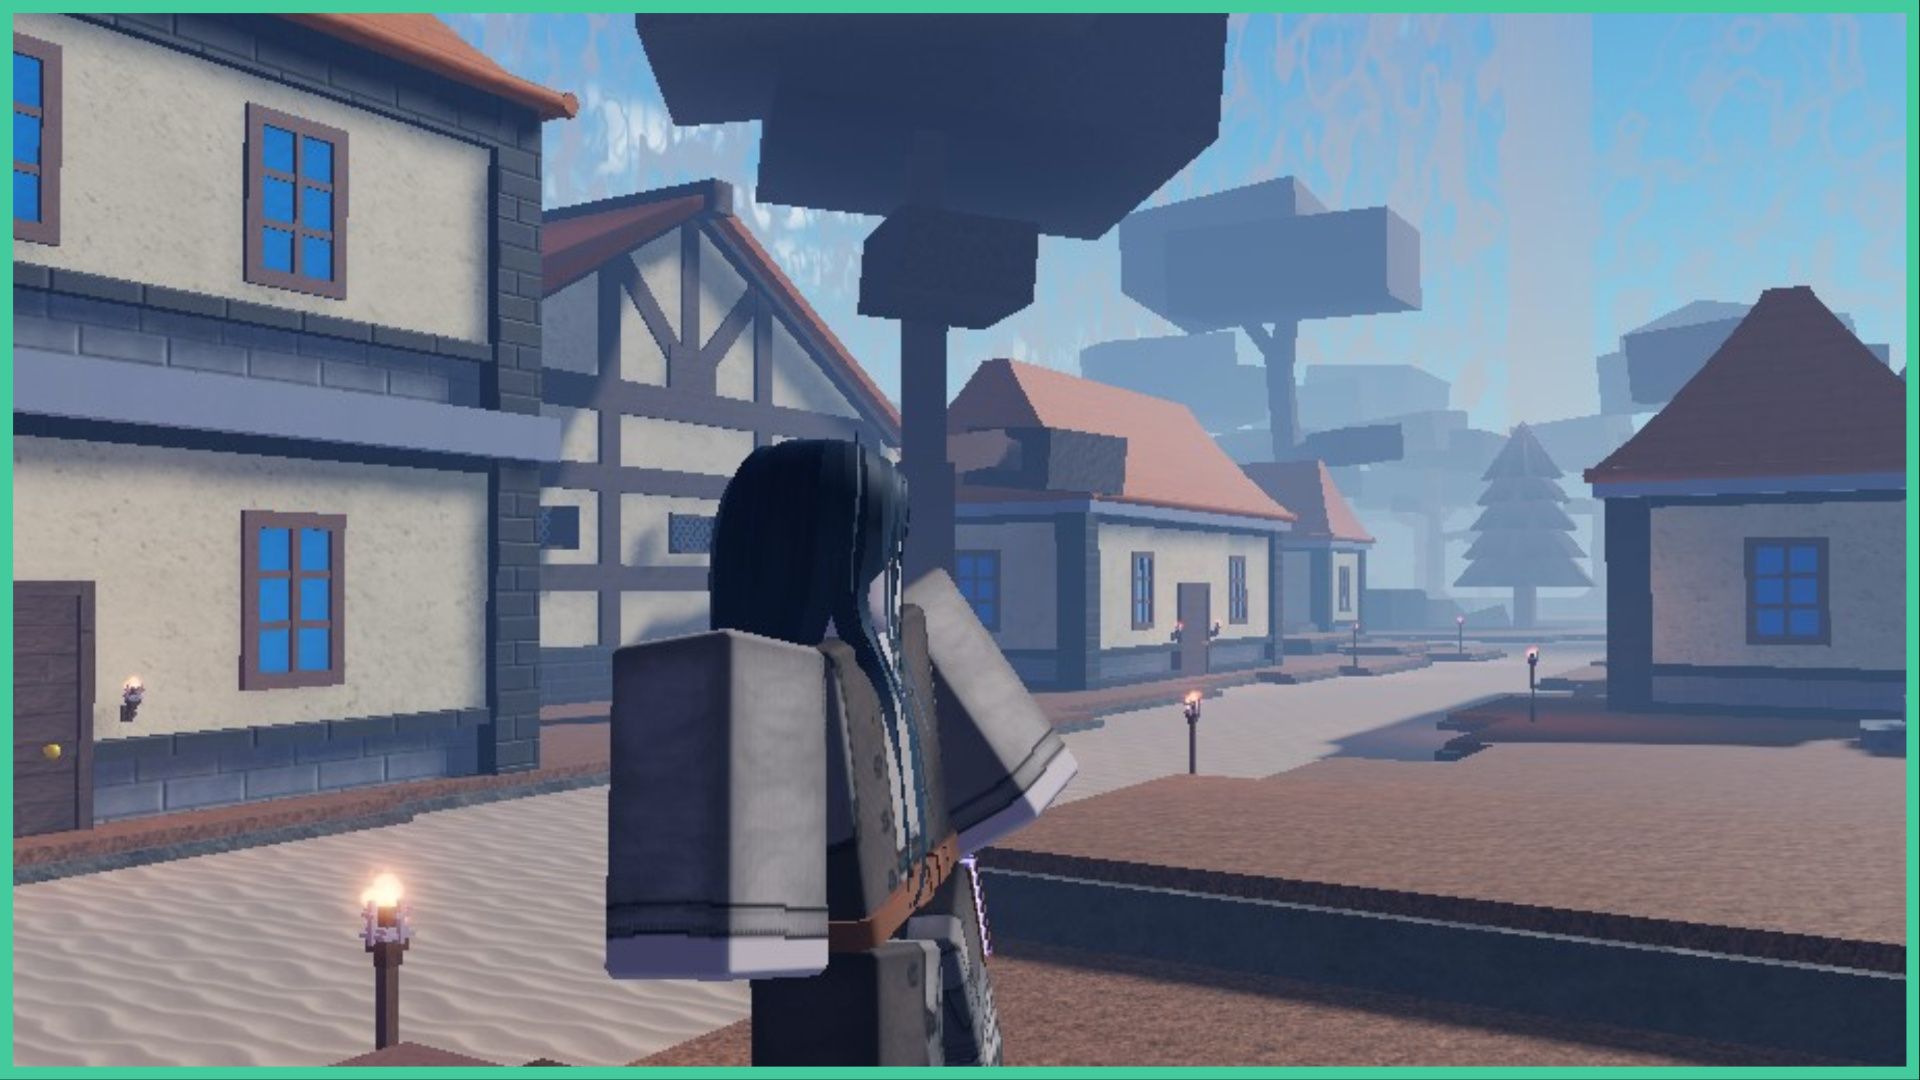 feature image for our clover retribution bosses guide, the image features a screenshot from the lobby area in the game, of a character standing on a wooden box as she lifts her shoulder slightly, surrounded by old-style buildings with stone and wooden beams, as well as tall trees that stretch out to a misty forest, there are lit lanterns across the sand path